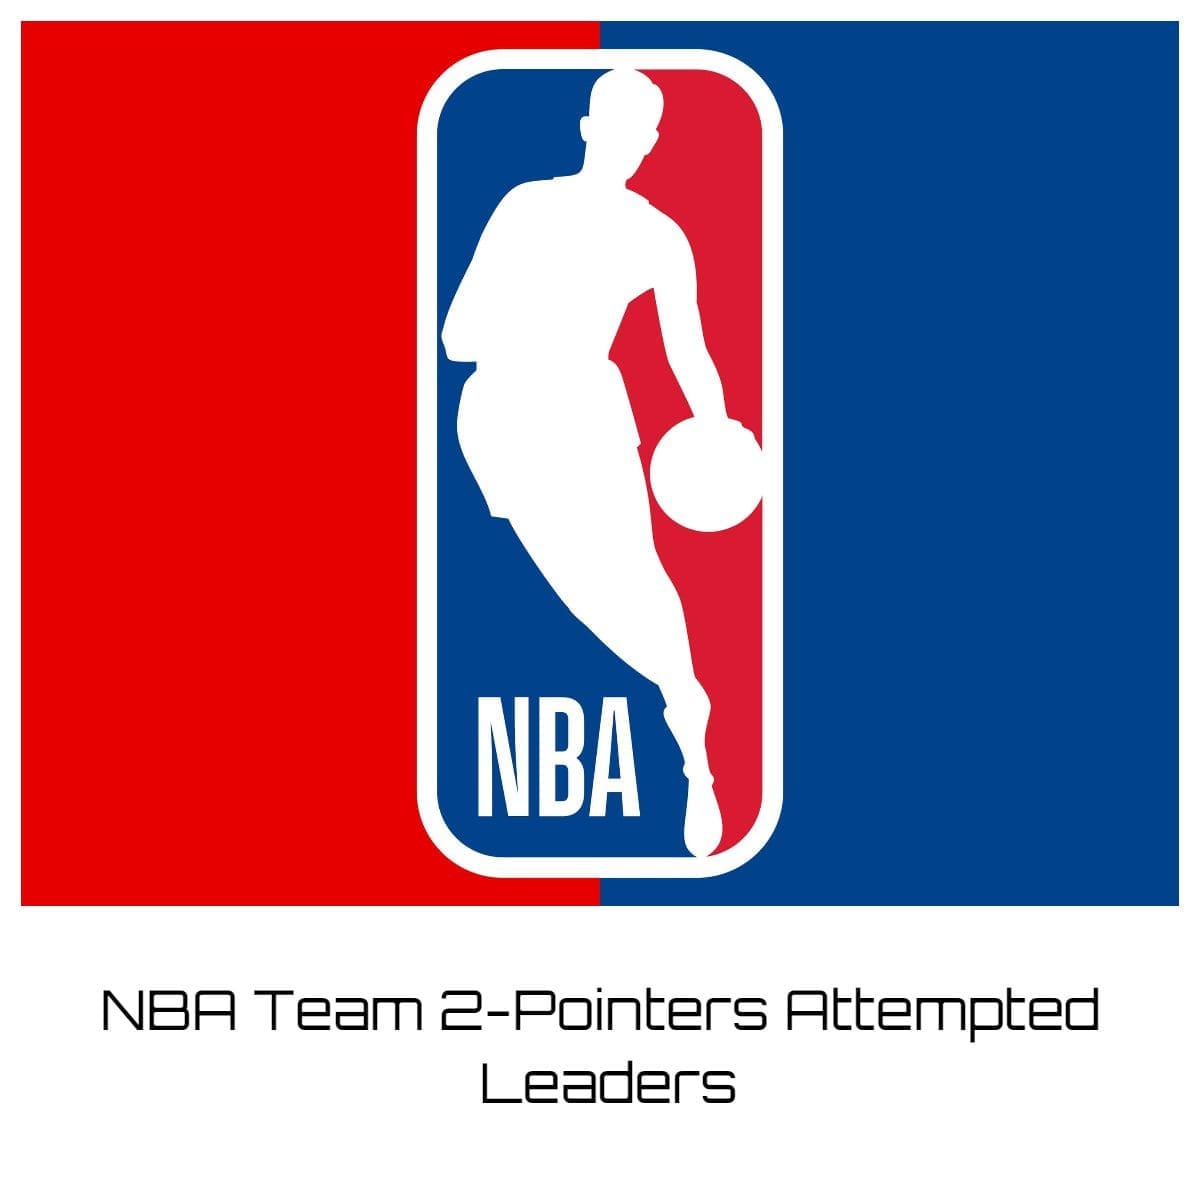 NBA Team 2-Pointers Attempted Leaders